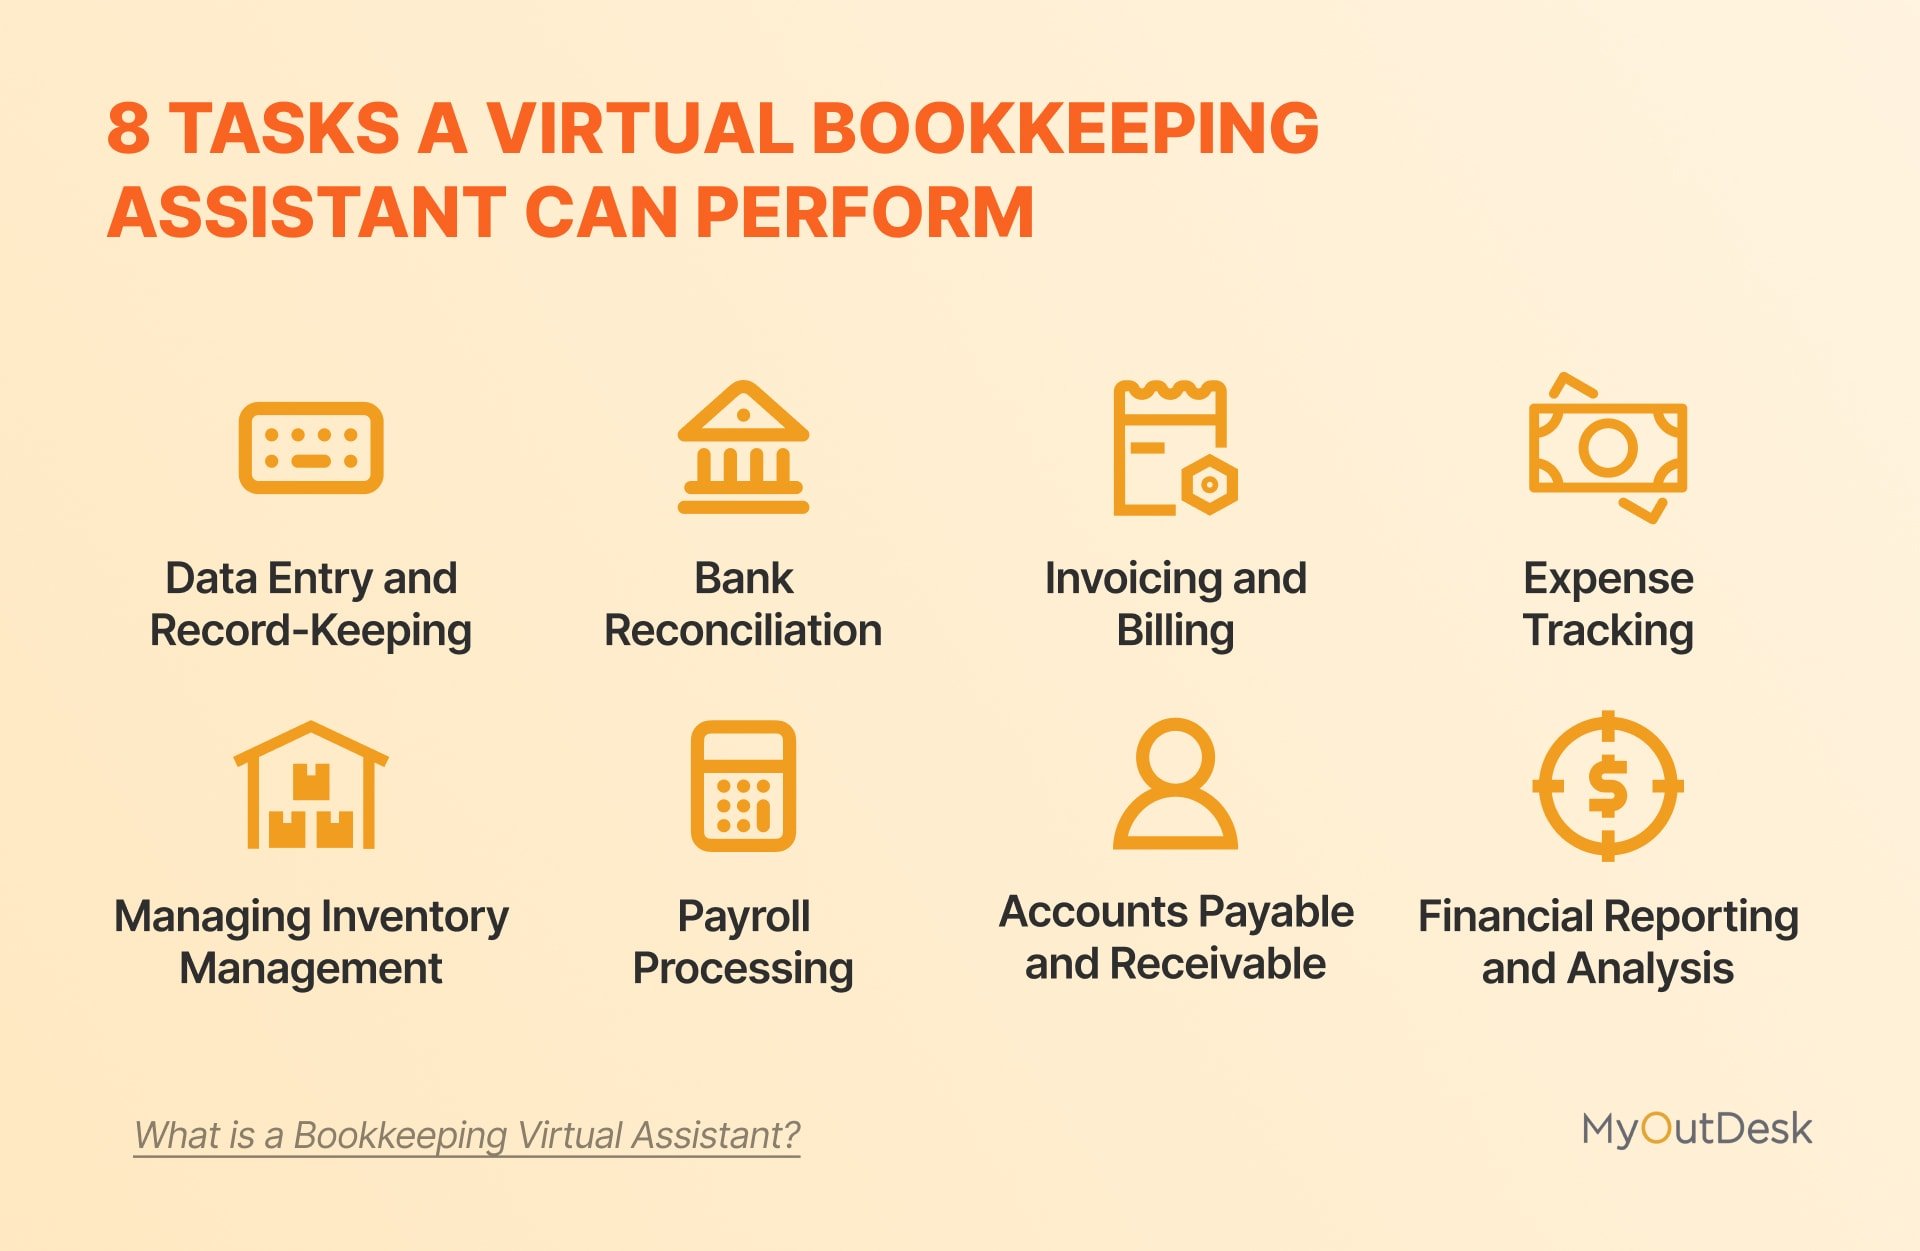 8 tasks a bookkeeping virtual assistant can perform: data entry, reconciliation, invoicing, expense tracking, inventory management, payroll processing, accounts payable and receivable, and reporting